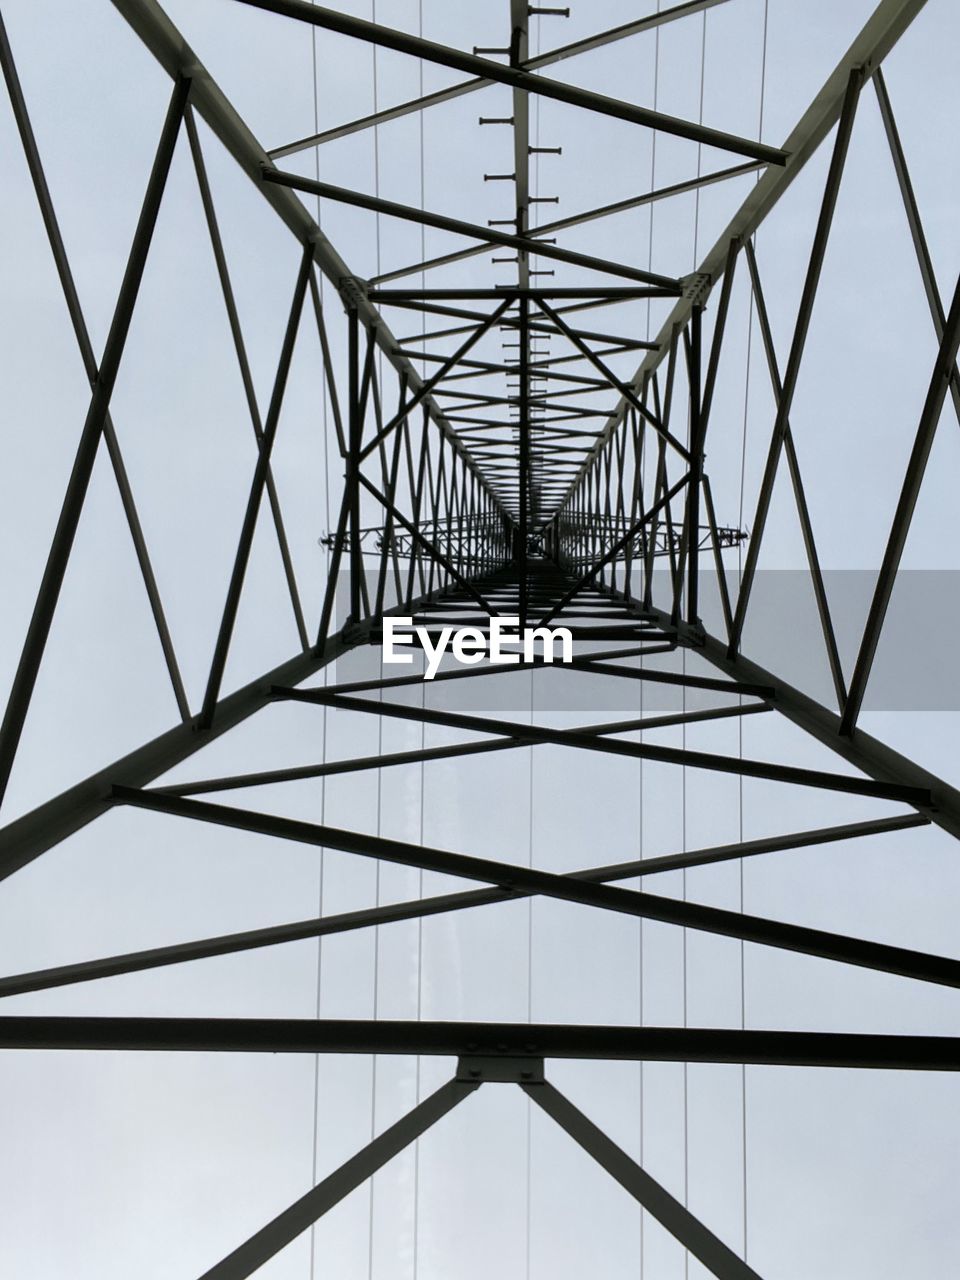 technology, electricity pylon, electricity, power supply, power generation, built structure, architecture, cable, line, sky, girder, pattern, no people, tower, communication, grid, abstract, outdoor structure, alloy, electrical grid, below, transmission tower, nature, steel, looking up, construction frame, silhouette, industry, high voltage sign, curve, arch, global communications, metal, concentric, power line, complexity, overhead power line, clear sky, sign, outdoors, cloud, hanging, warning sign, business finance and industry